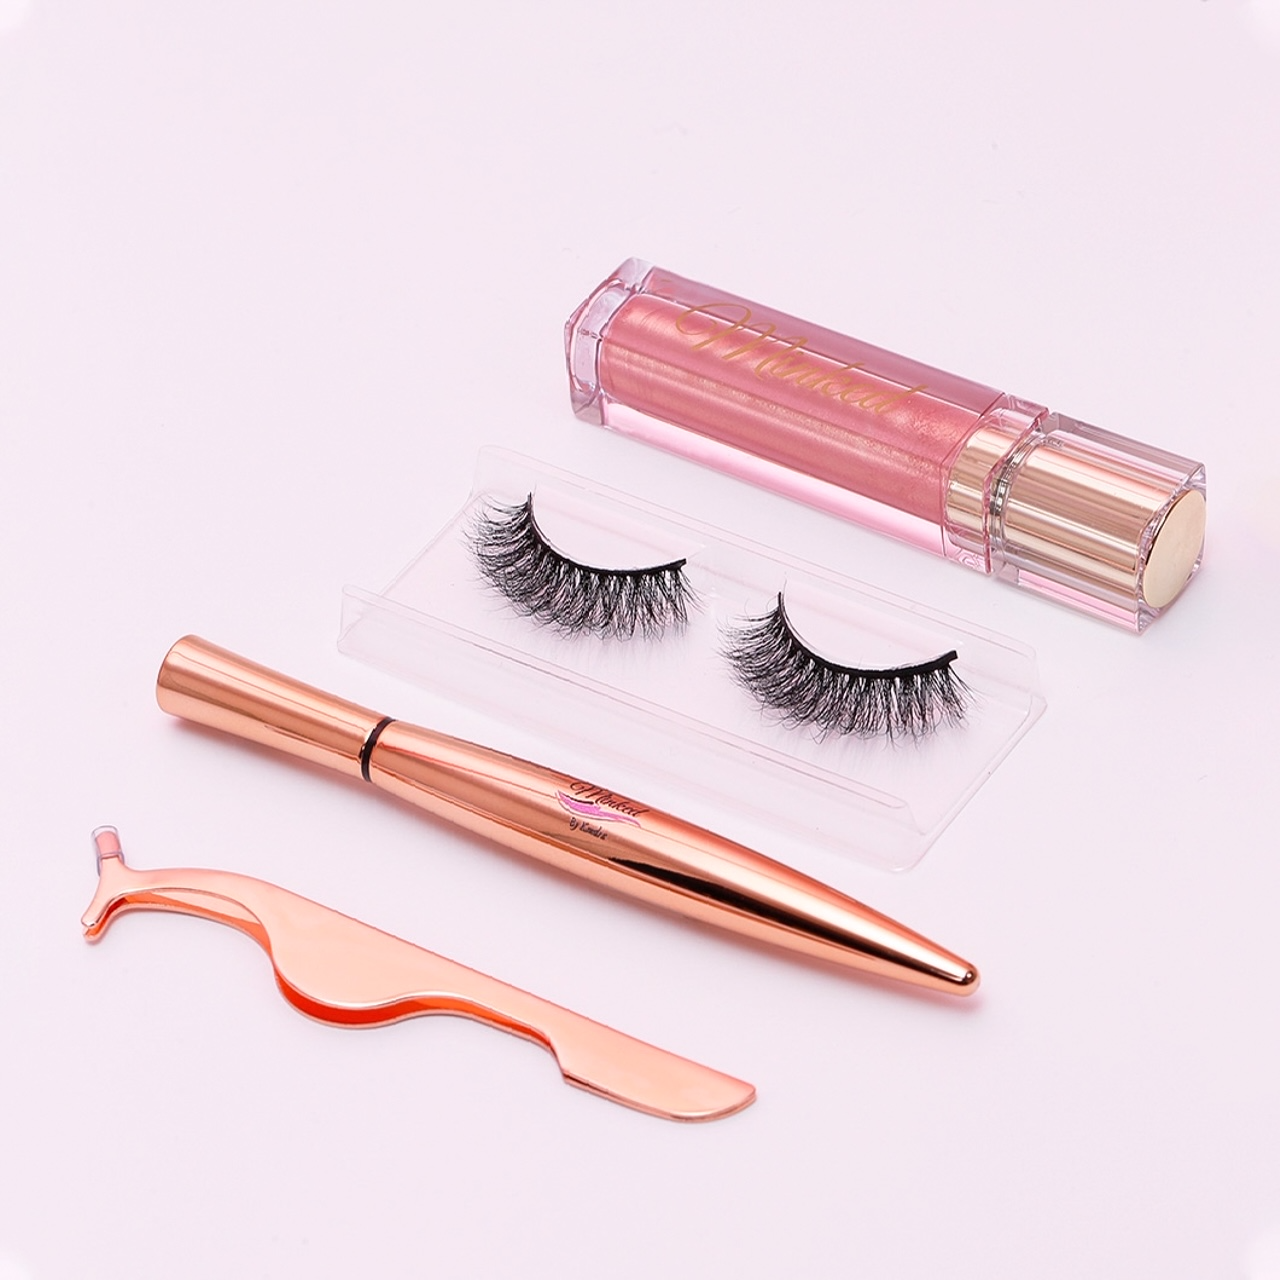 All in one Glam Kit